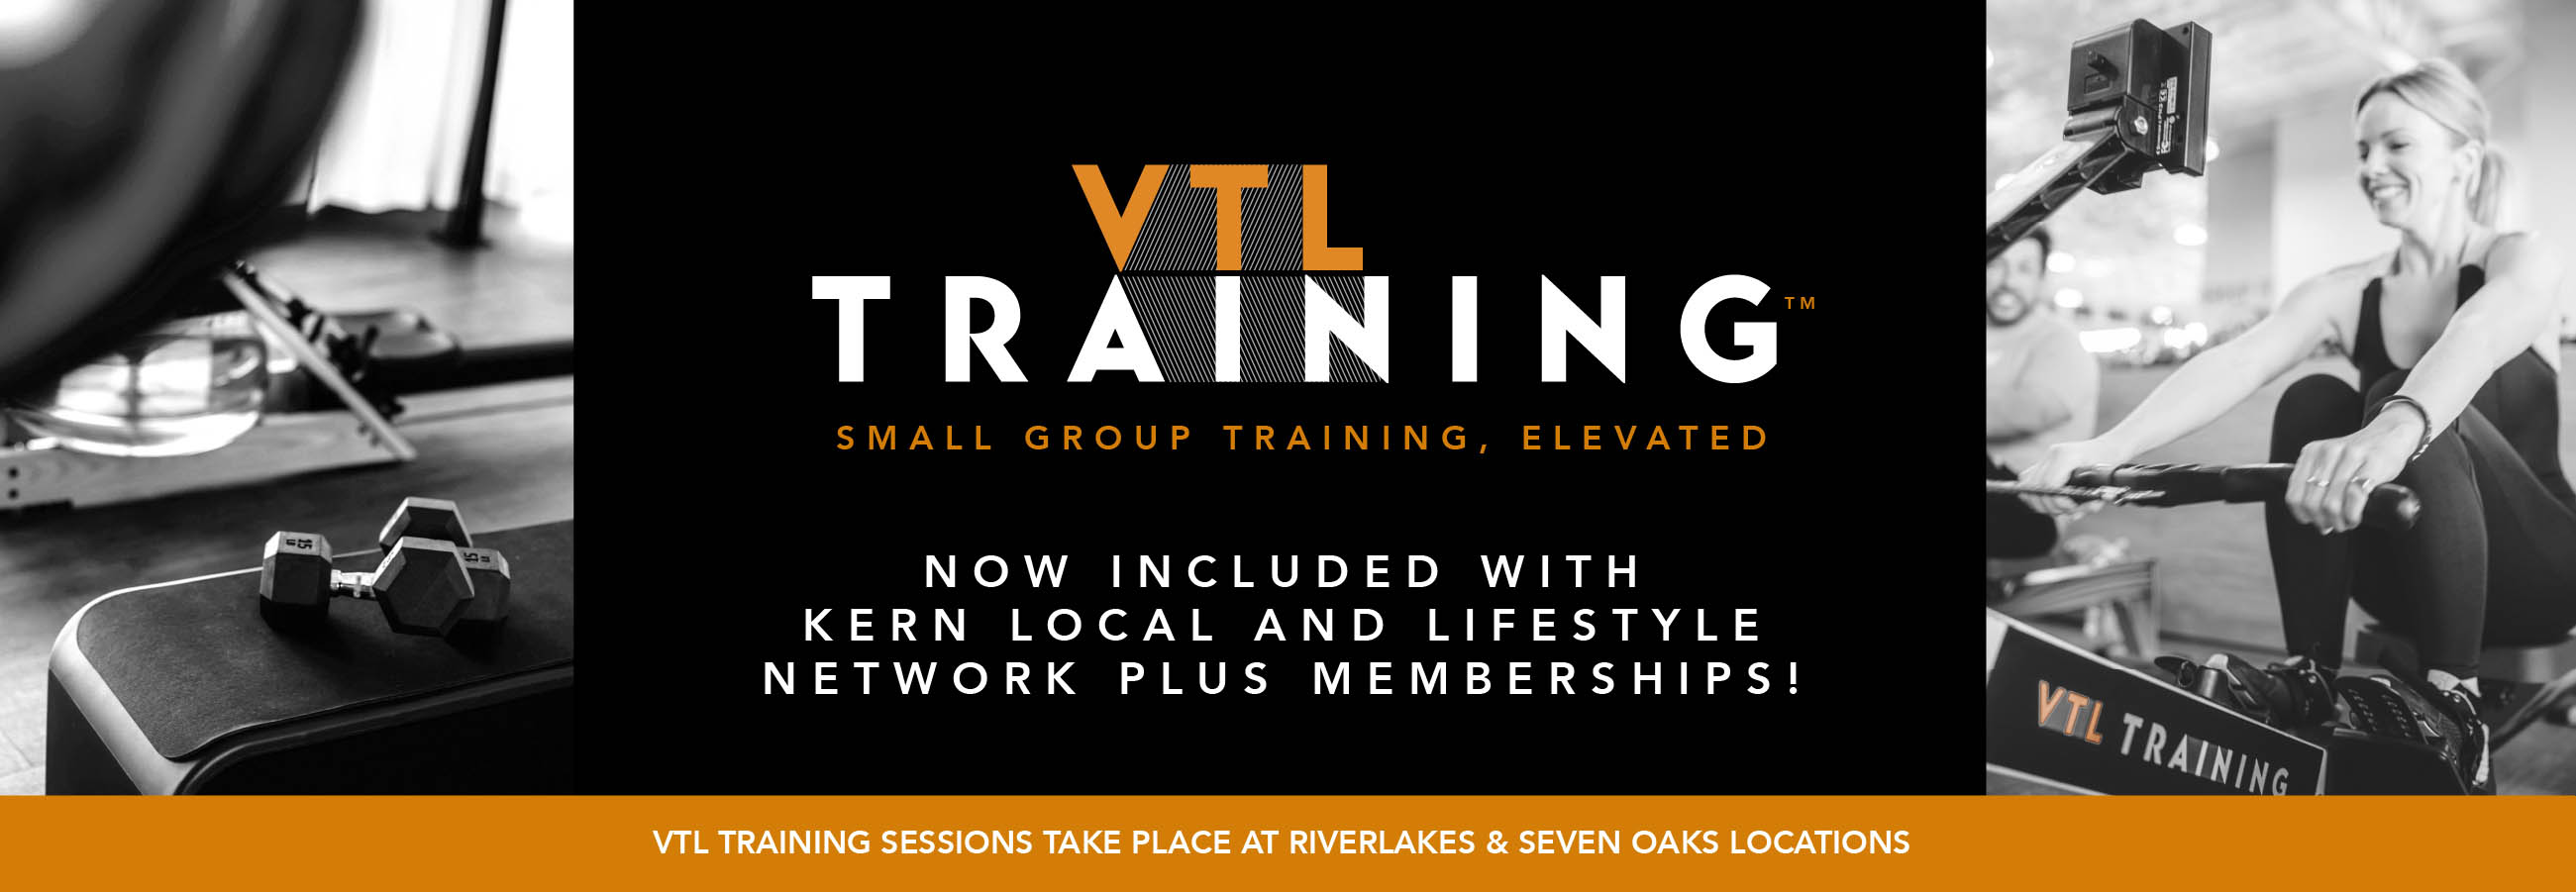 VTL Training is coming to Bakersfield March 7th!